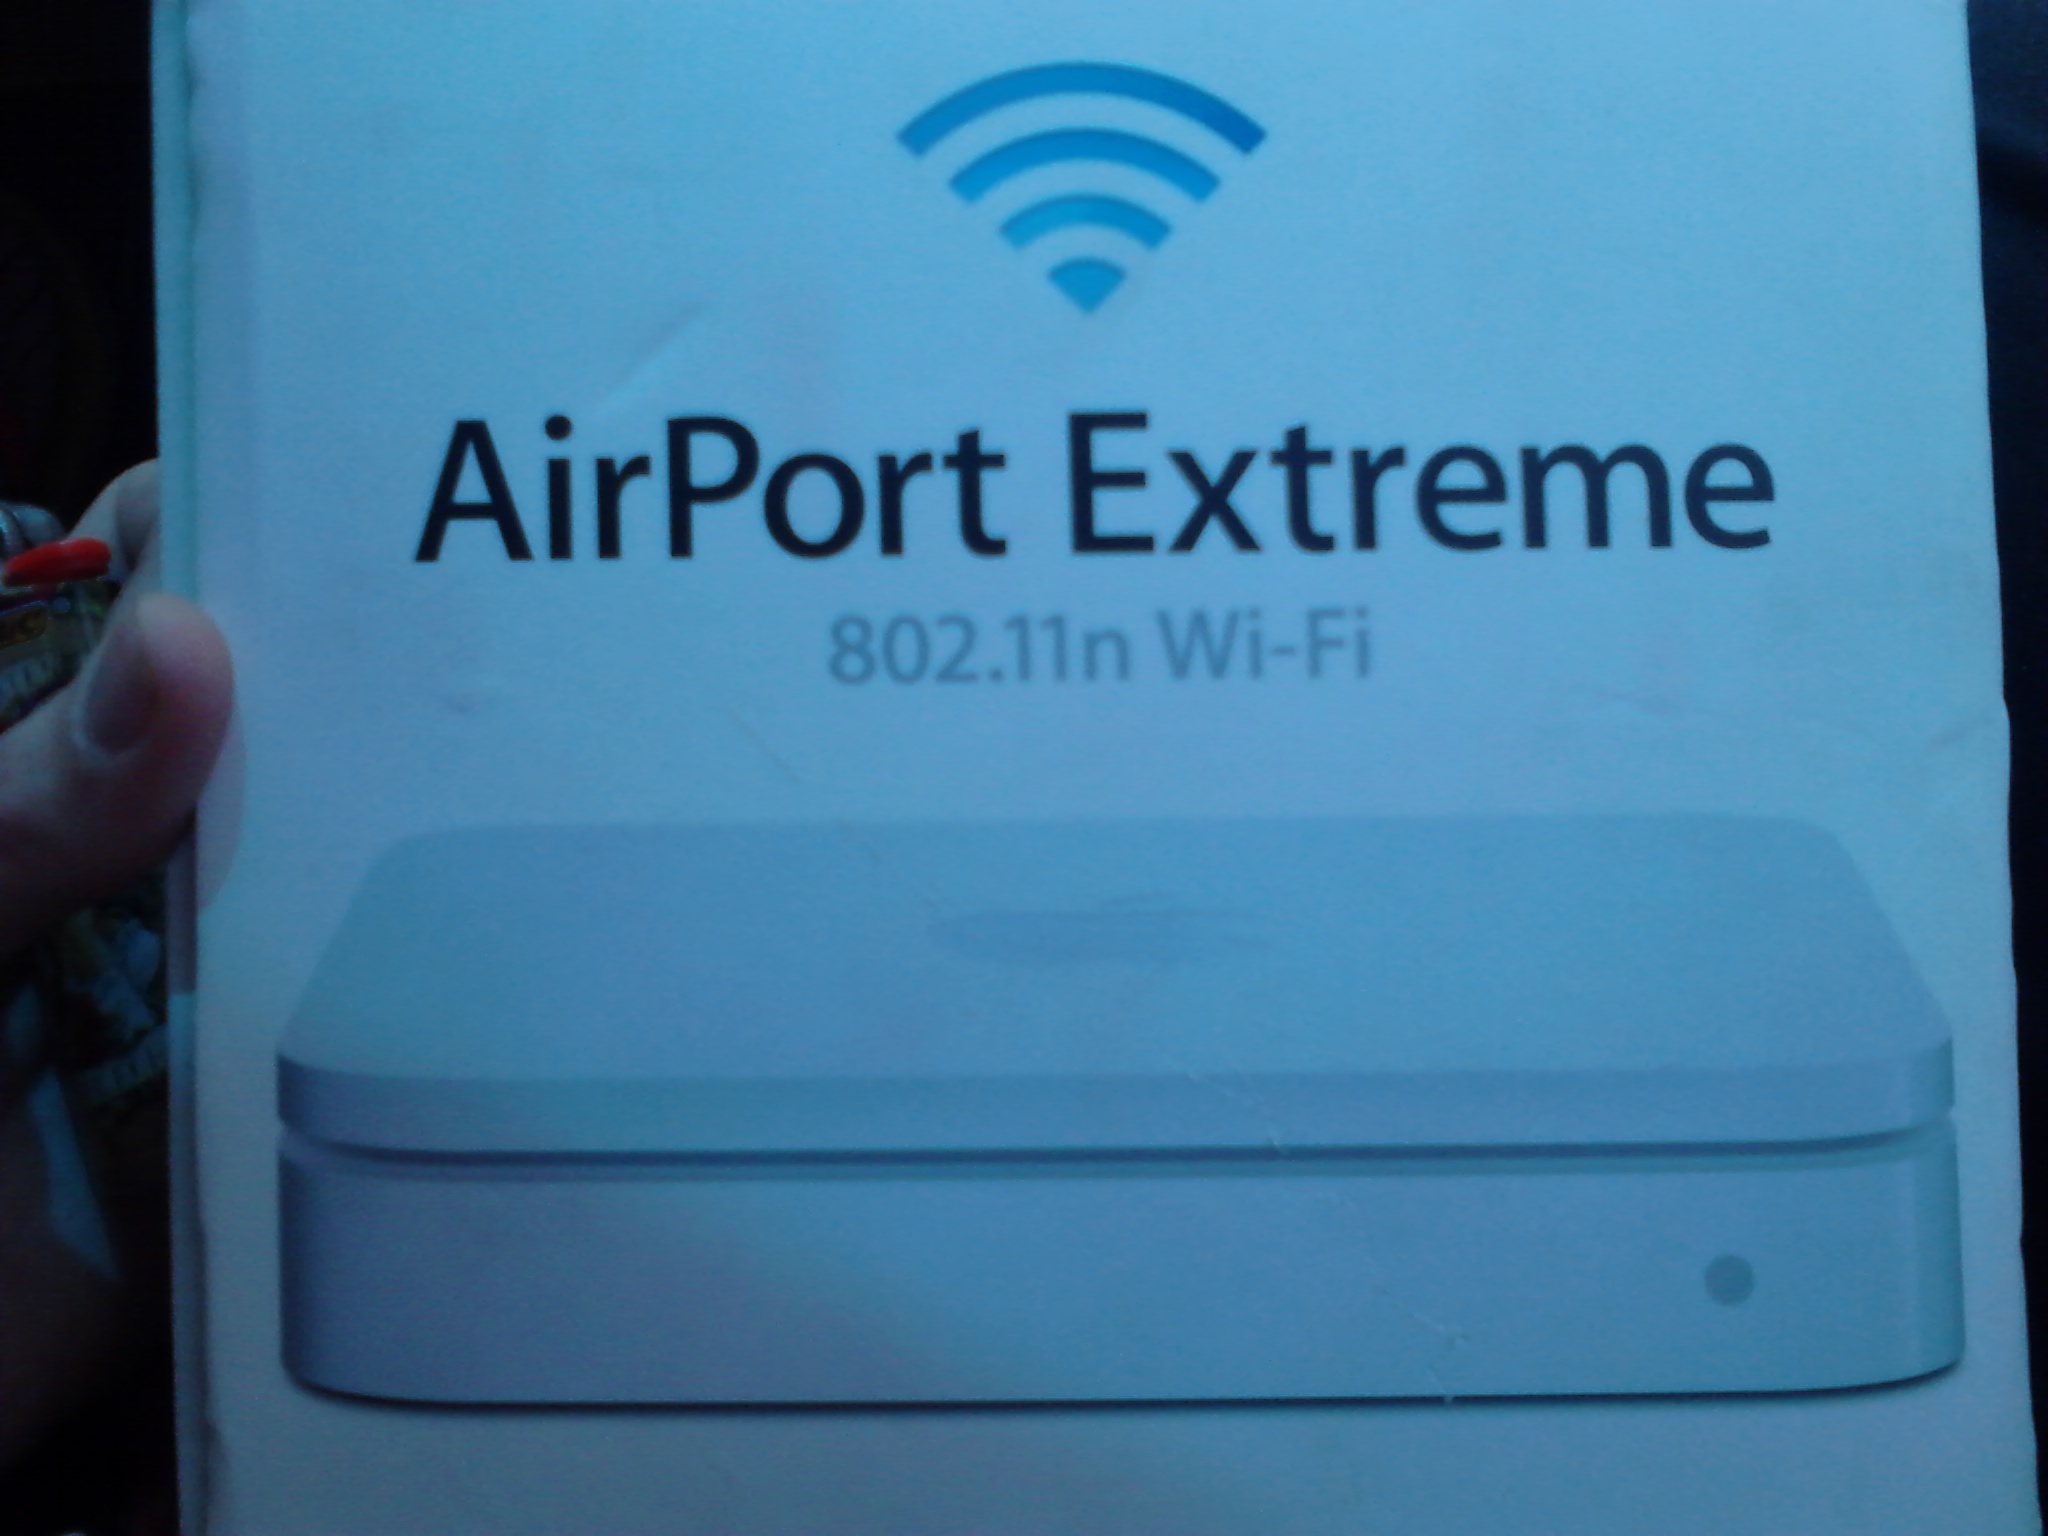 airport extreme 802.11n wi-fi